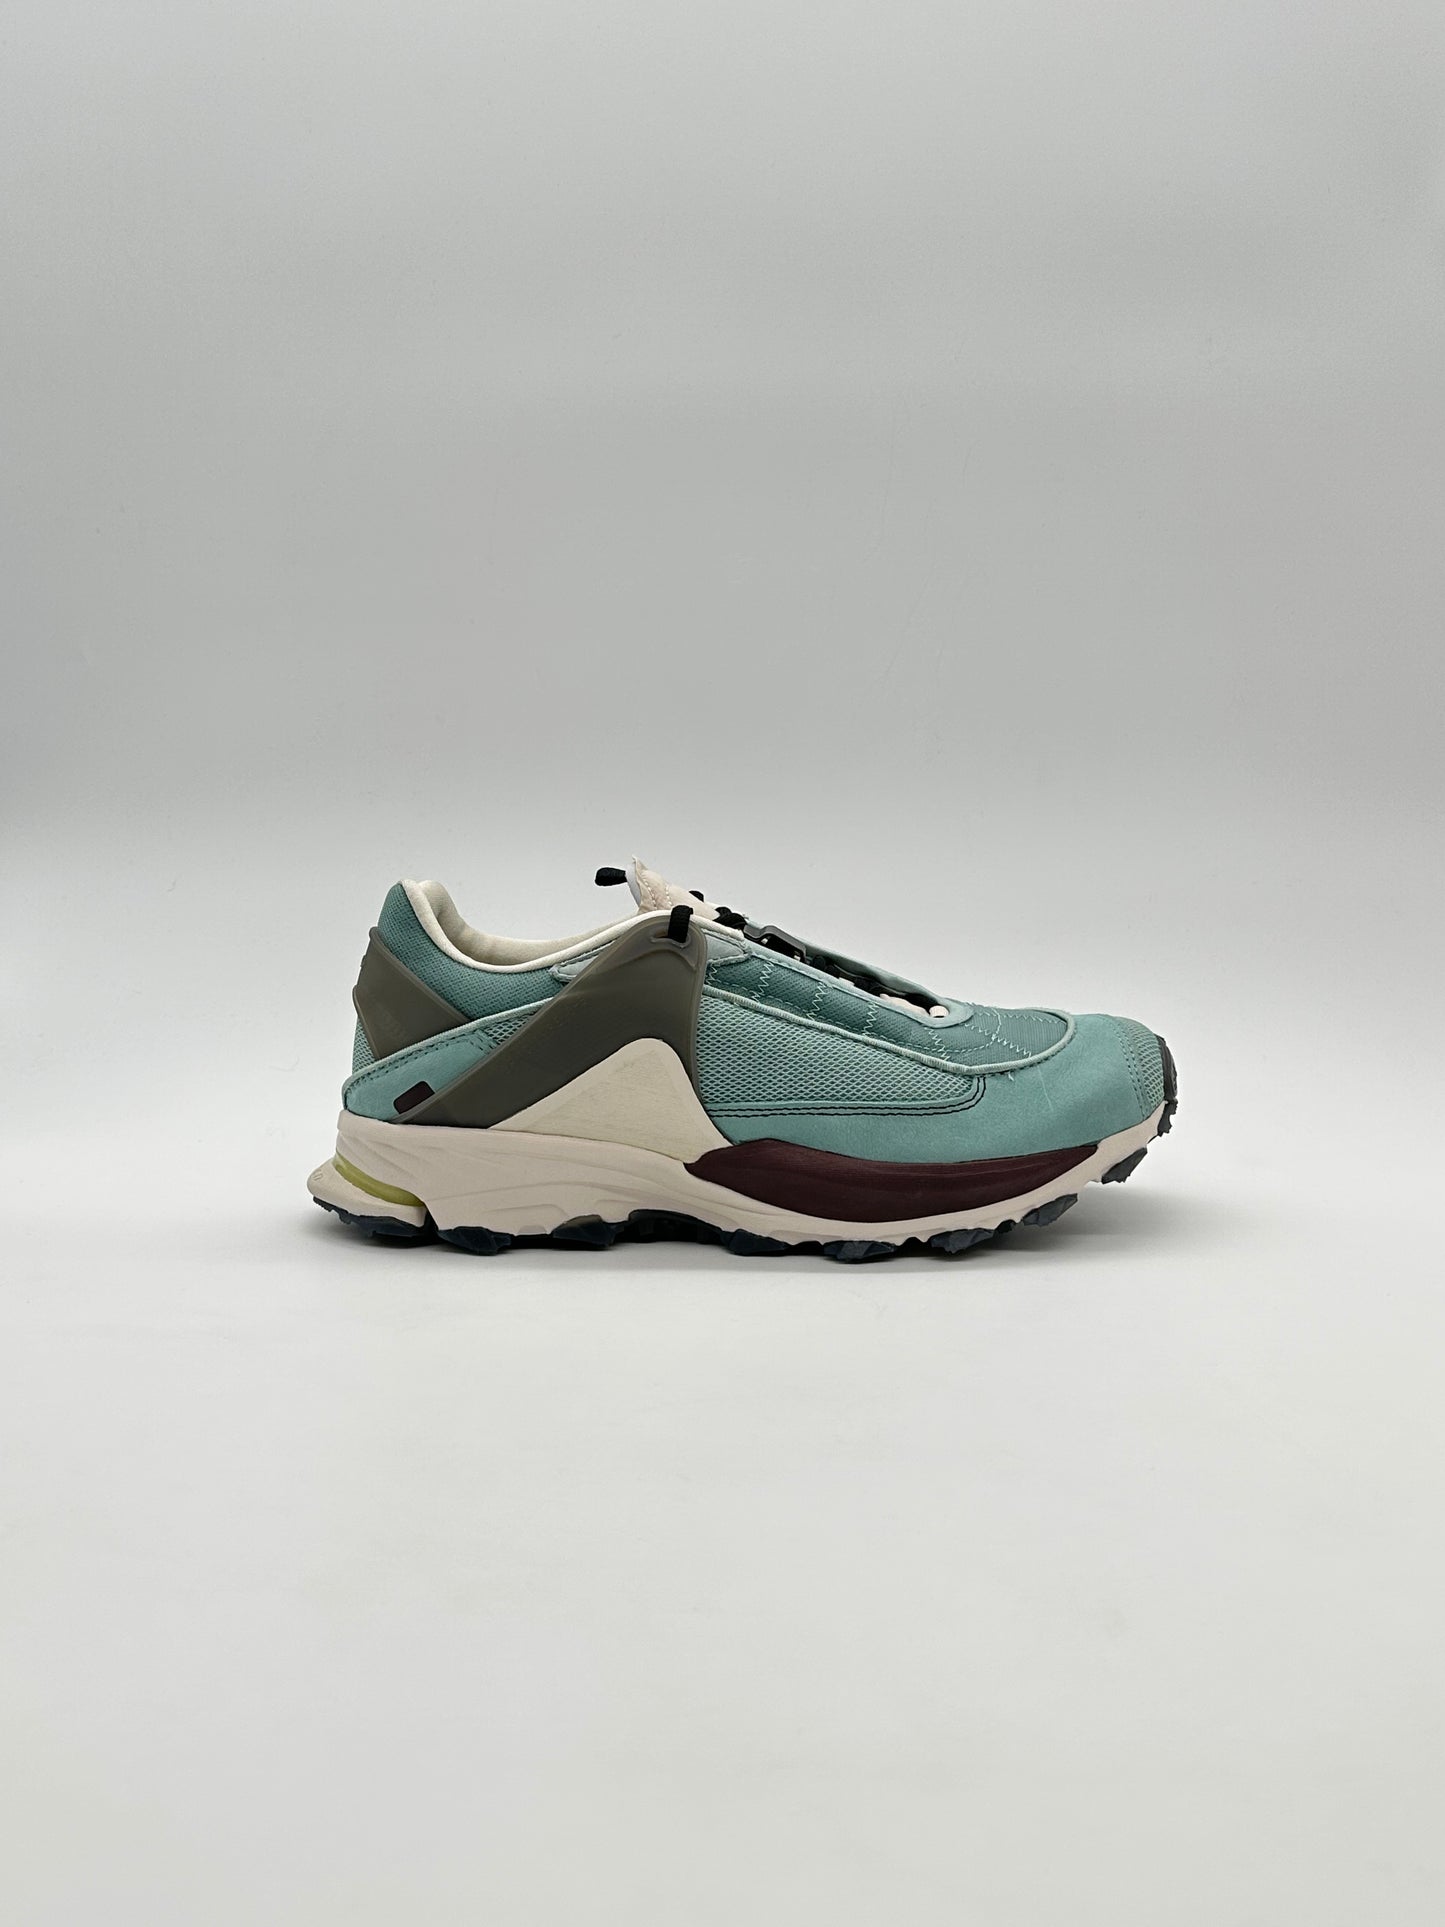 Fromotion Type 0-5 Low Sneakers